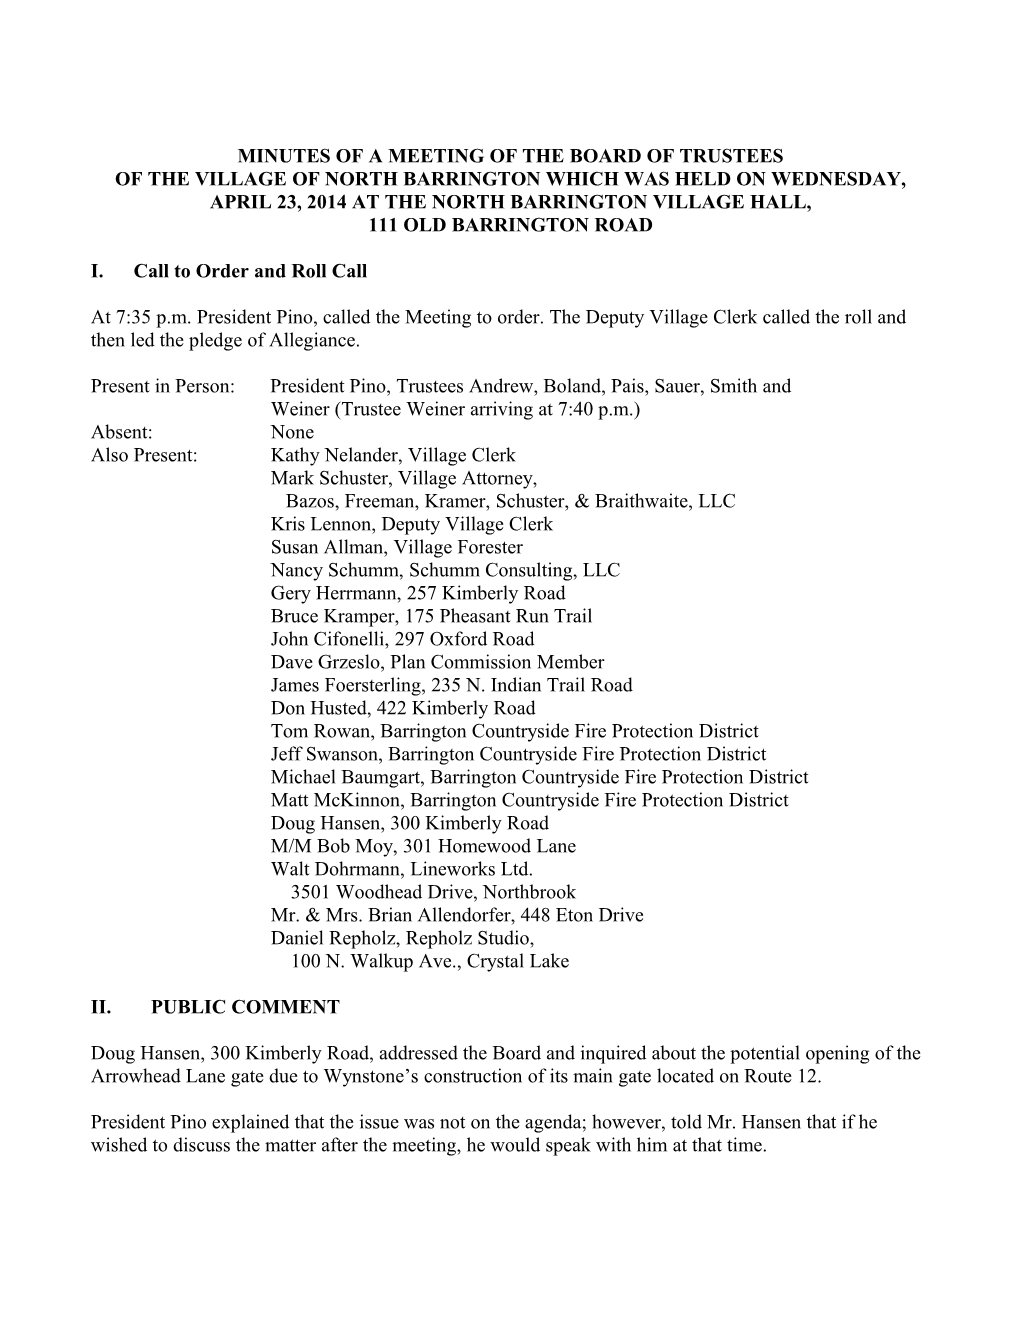 Minutes of the Public Hearing Held by the Board of Trustees